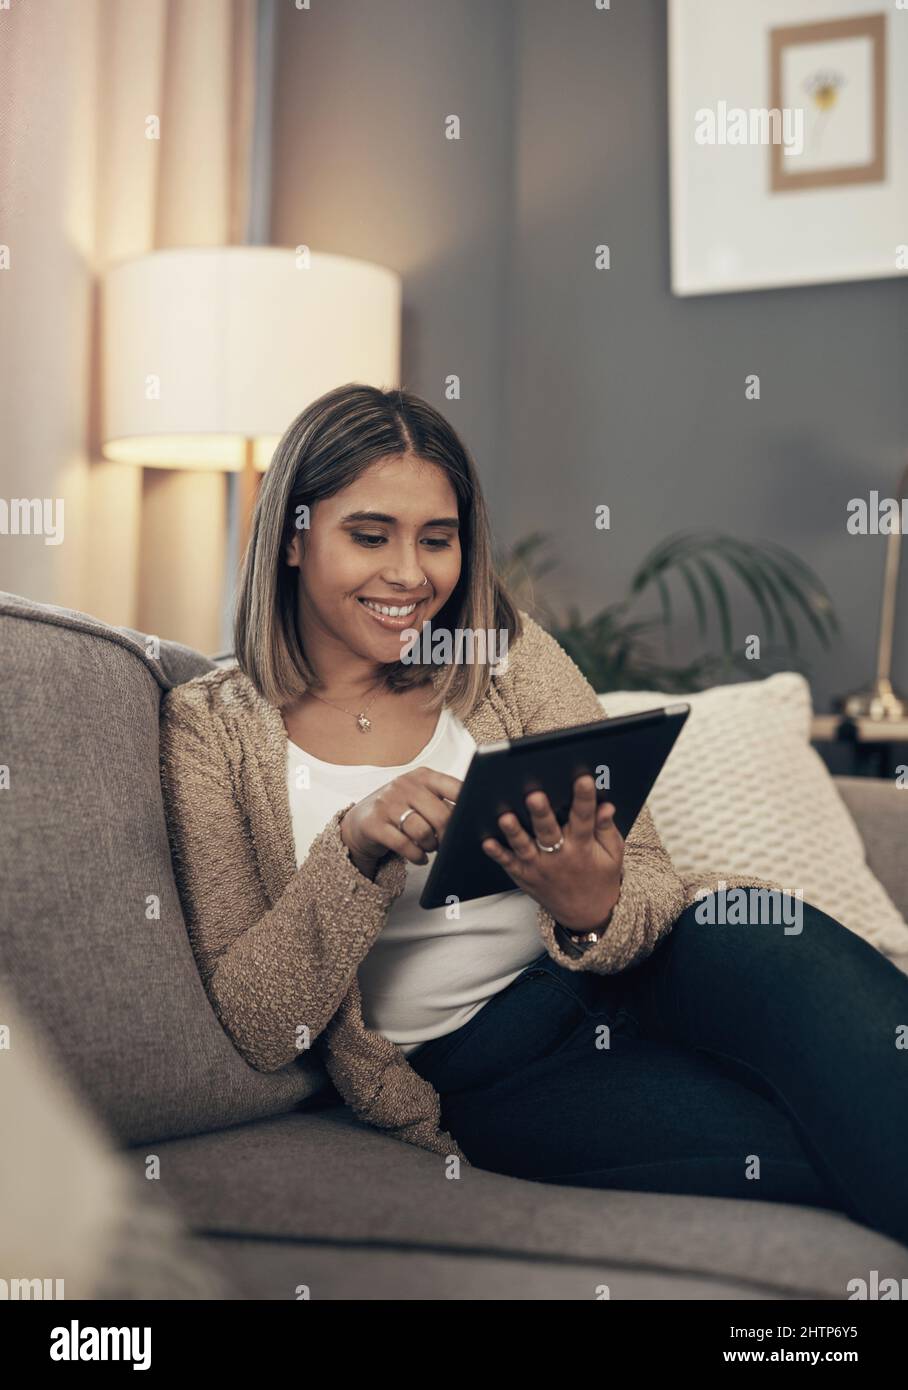 Turning her tablet into a mini tv. Shot of a young woman using a digital tablet on the sofa at home. Stock Photo